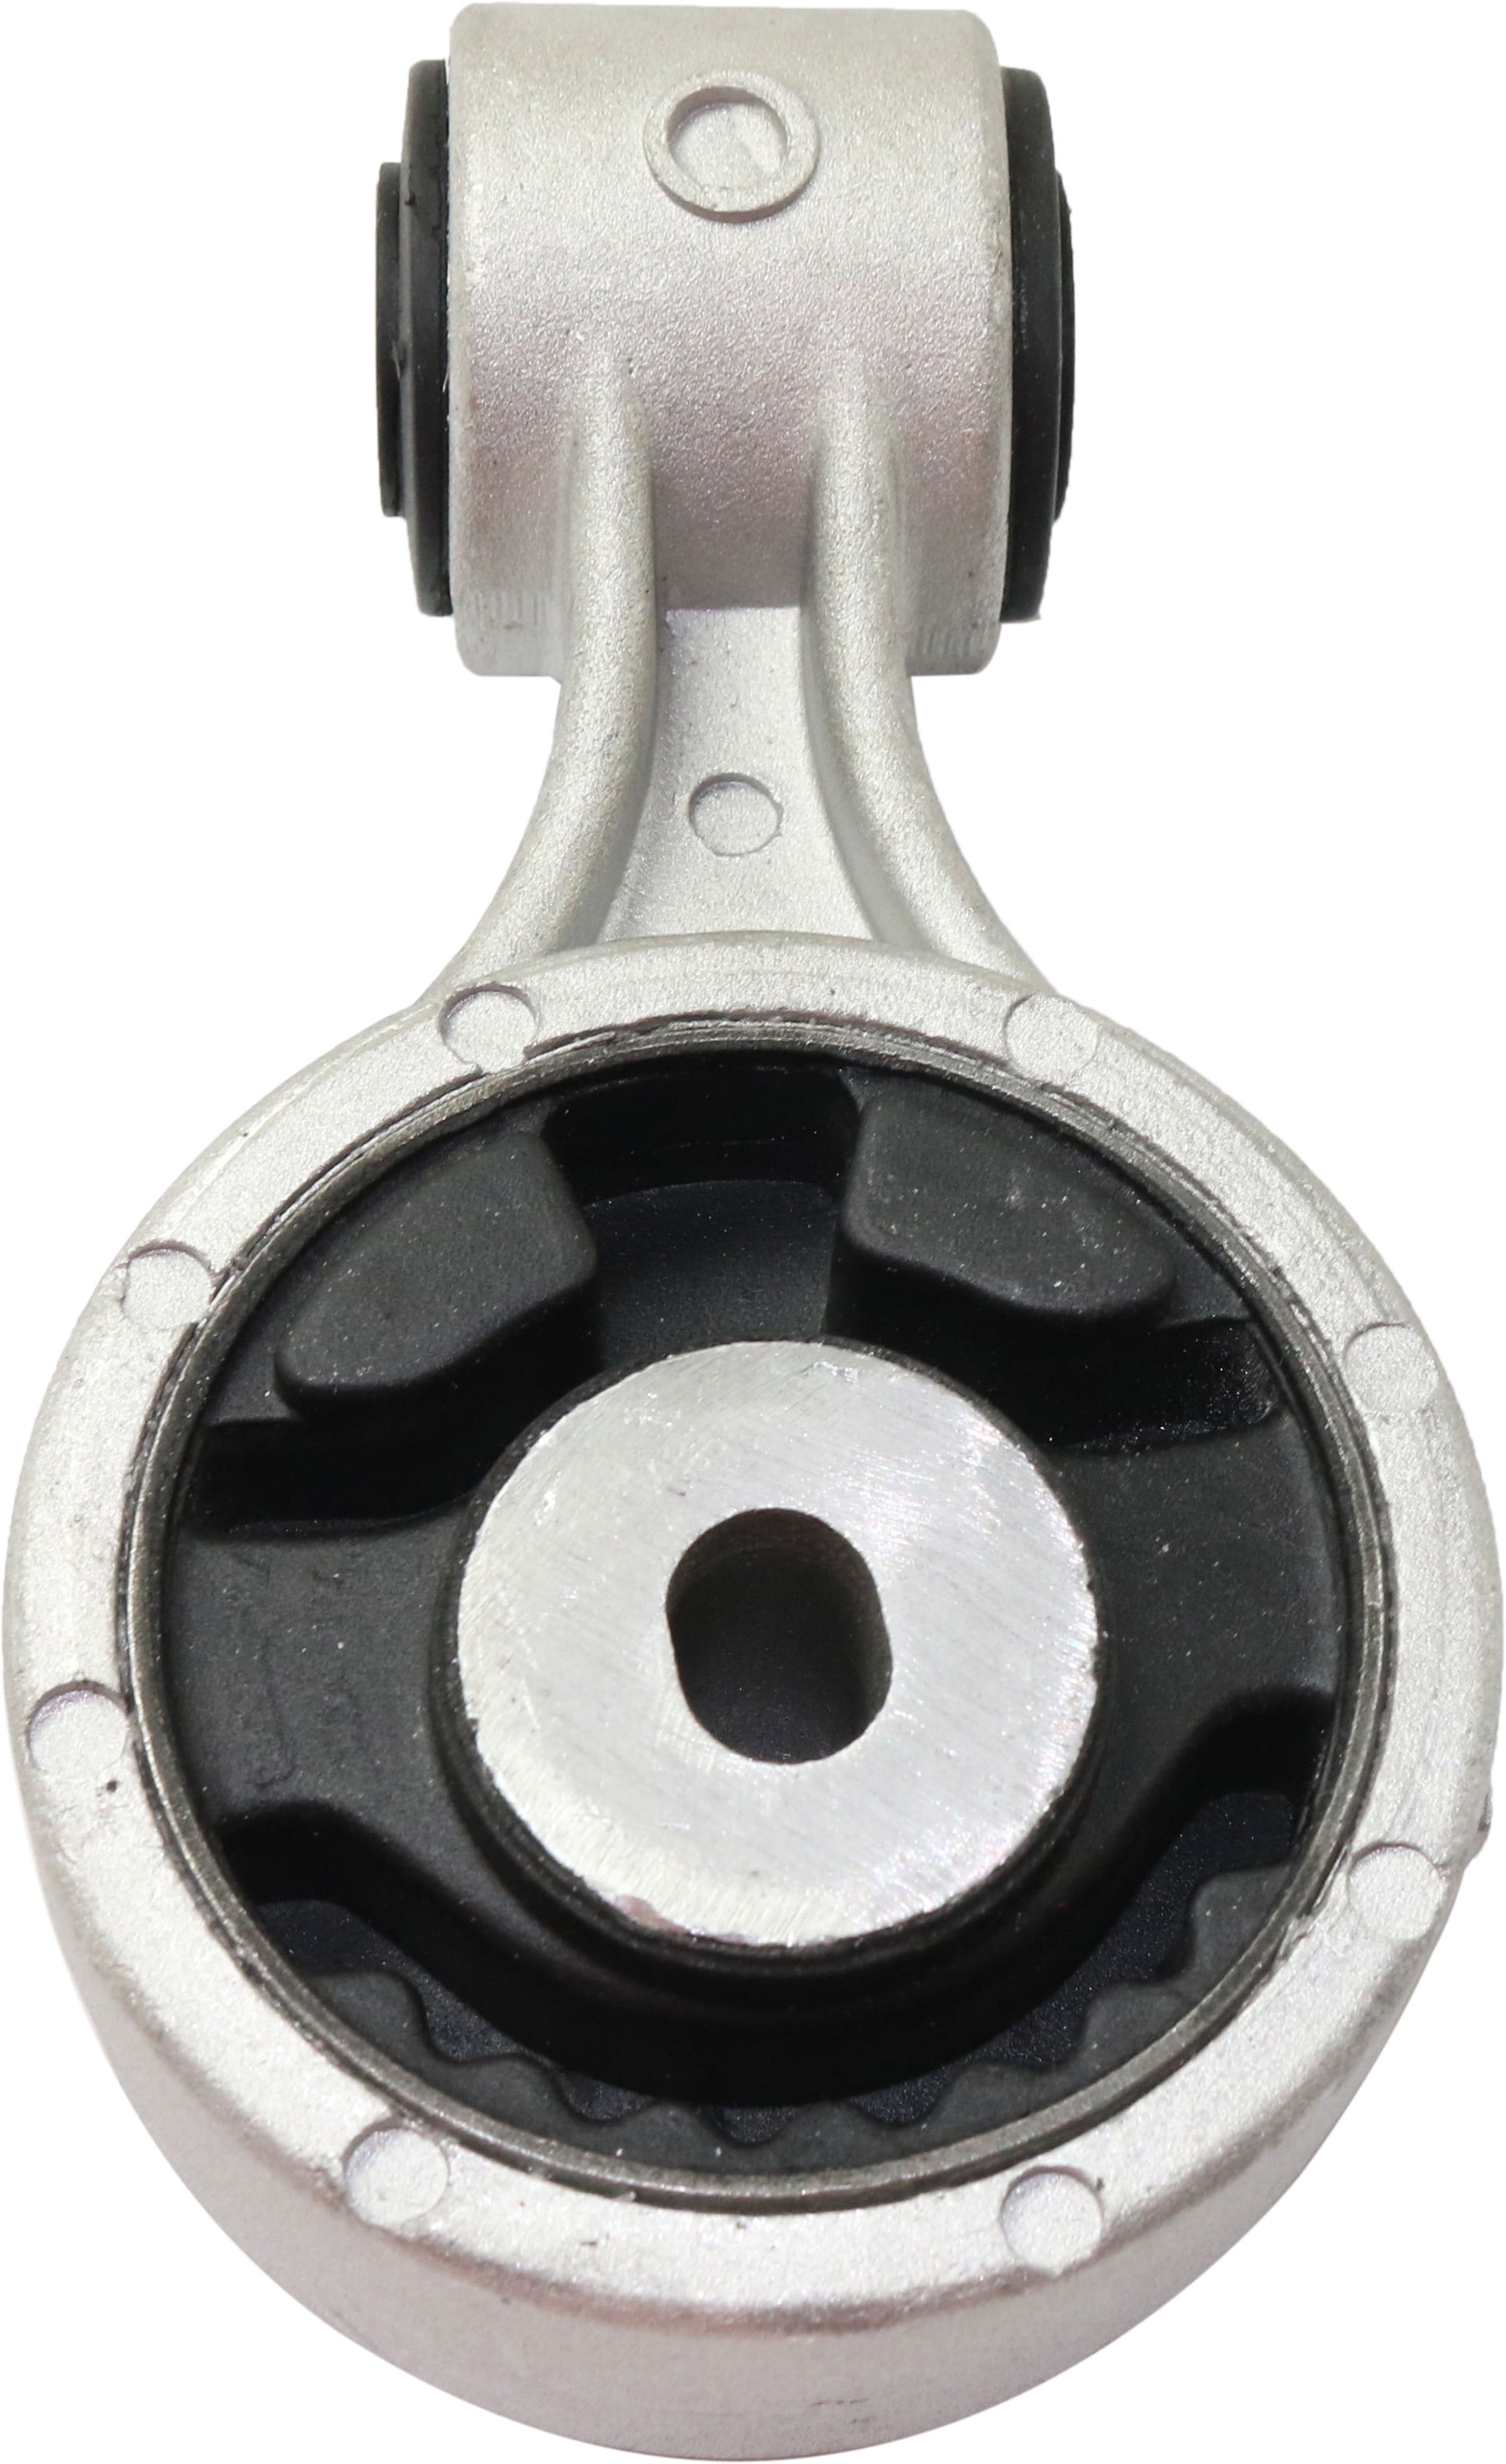 Engine Torque Mount Compatible with 2013 Infiniti JX35 and 2007